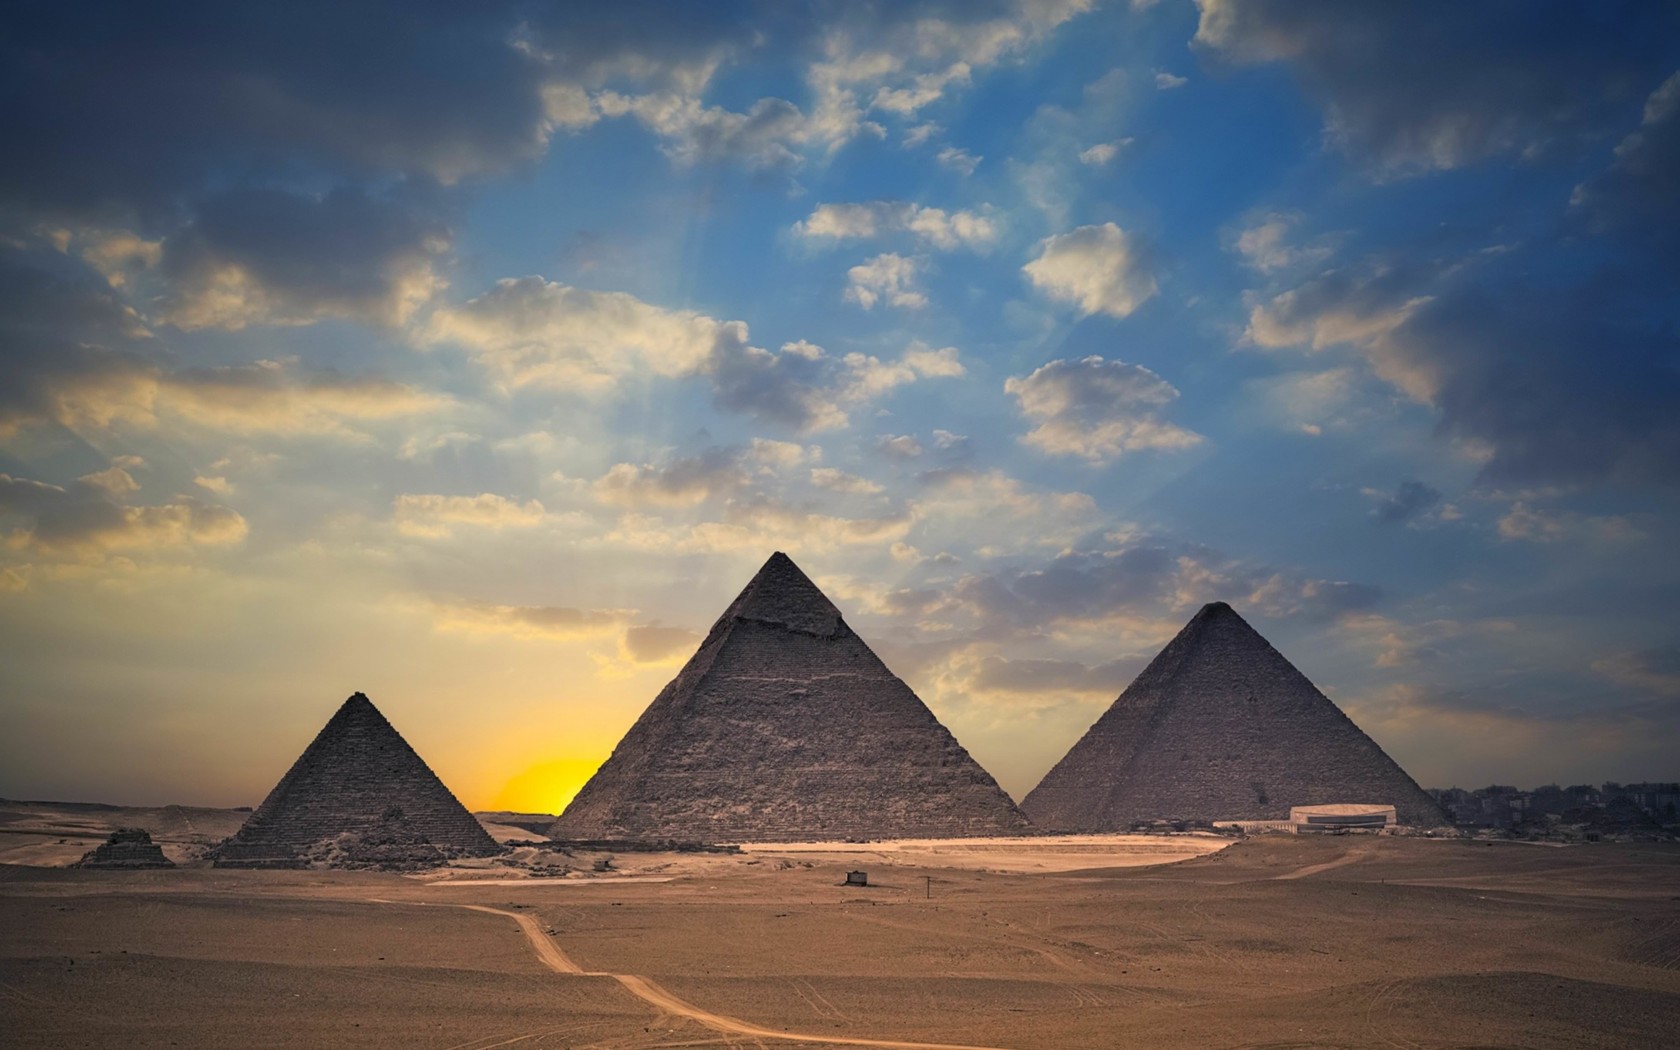 The Great Pyramids of Giza Wallpaper for Desktop 1680x1050